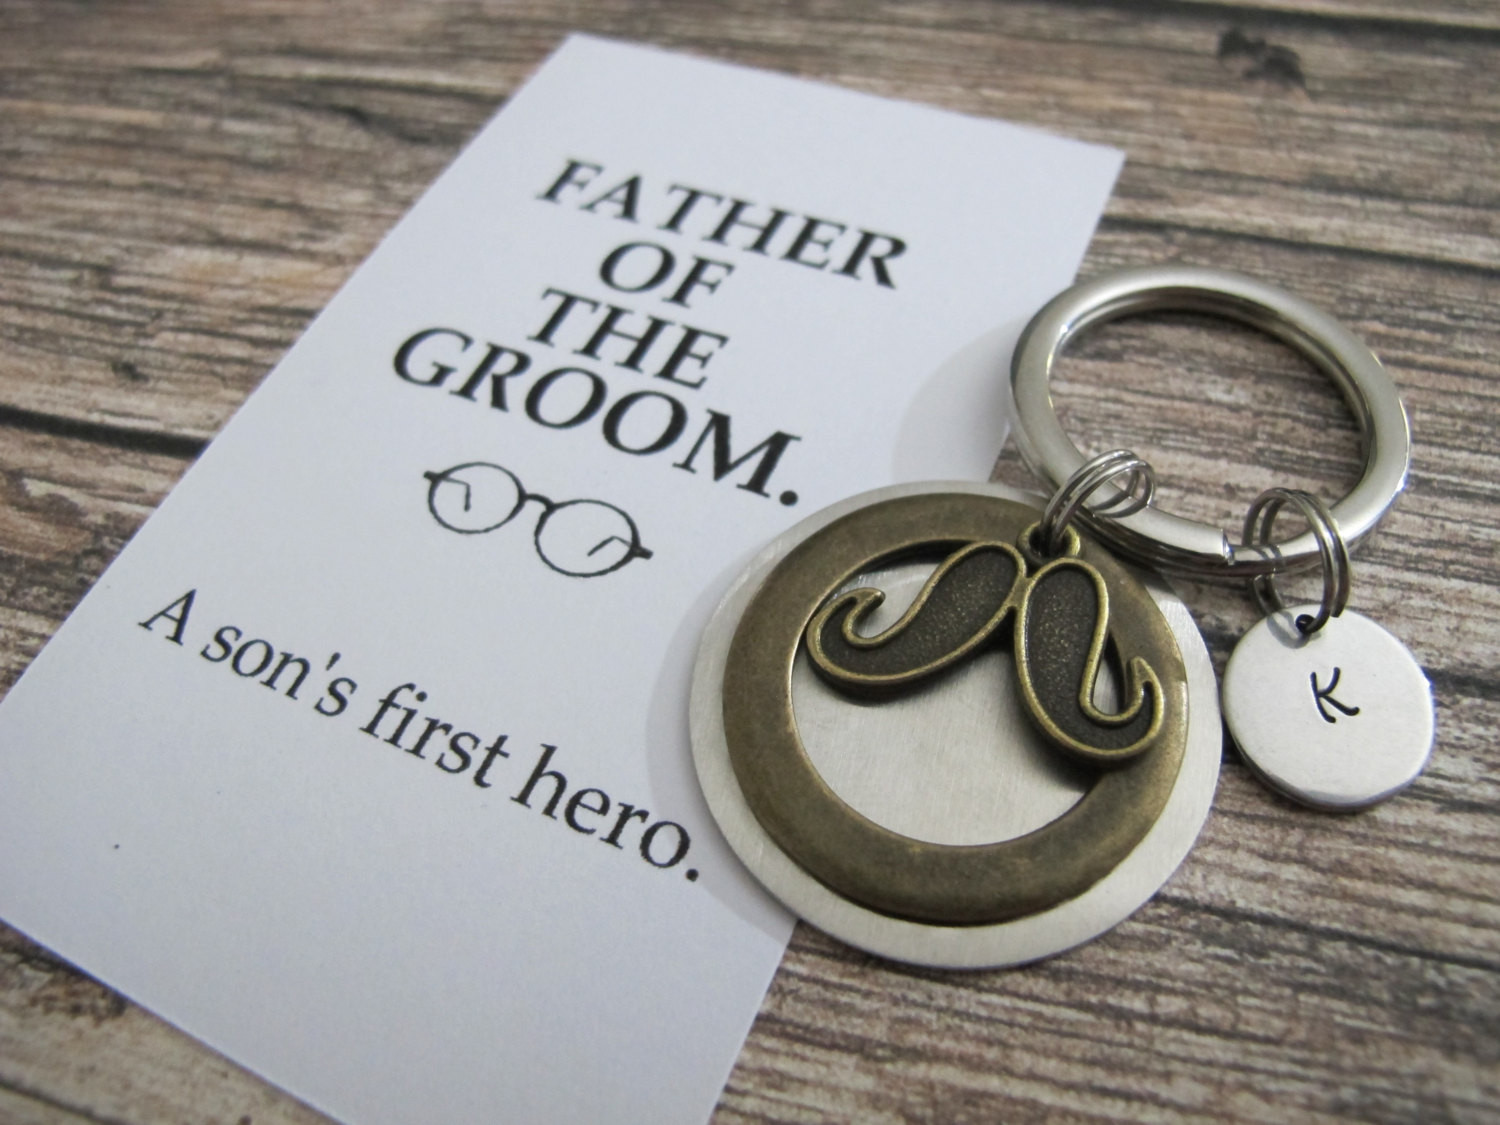 Father Of The Groom Gift Ideas
 FATHER of the GROOM t PERSONALIZED keychain a son s